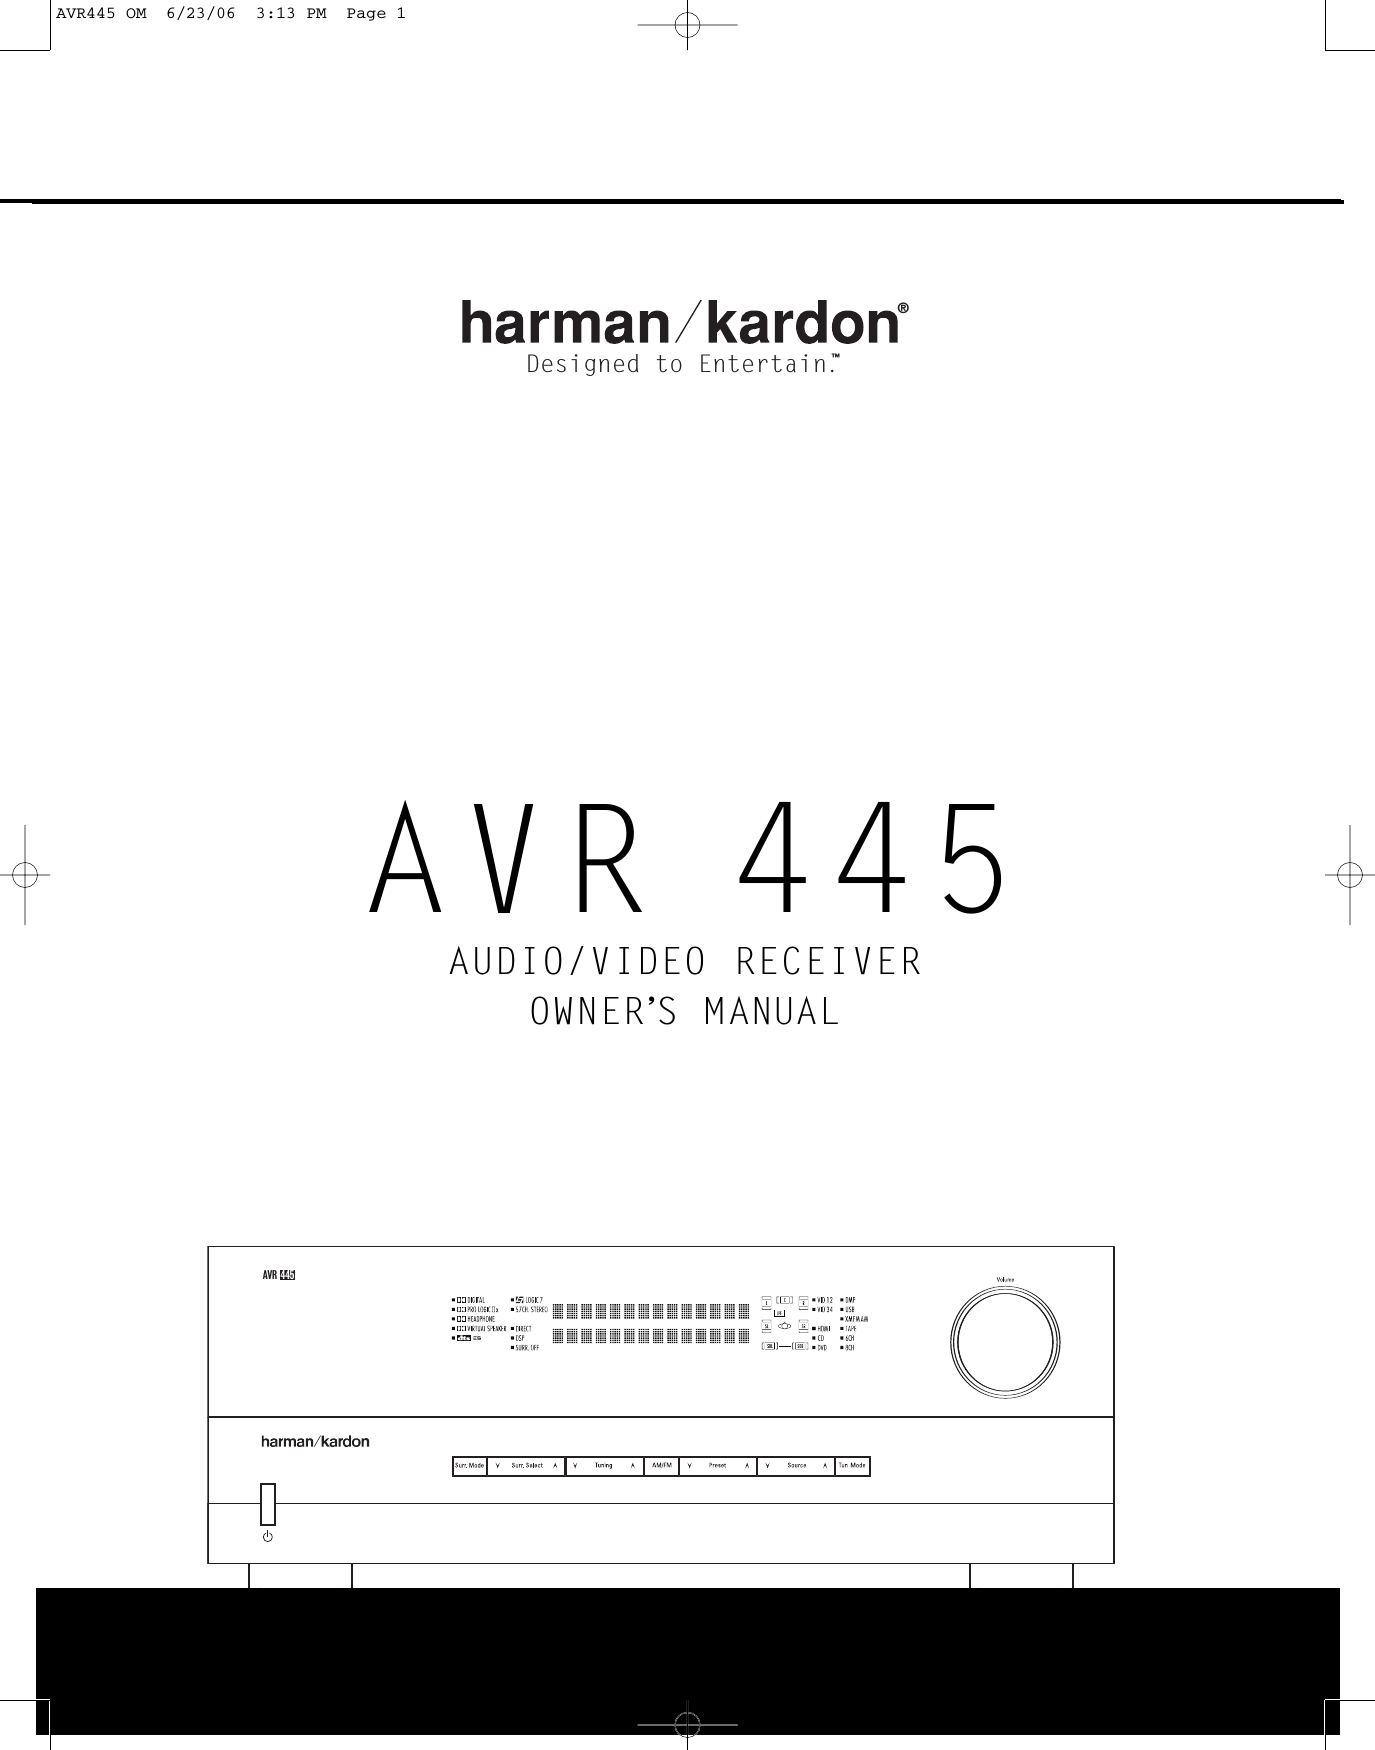 AVR  445AAVR 445AUDIO/VIDEO RECEIVEROWNER’S MANUALDesigned to Entertain.™®AVR445 OM  6/23/06  3:13 PM  Page 1